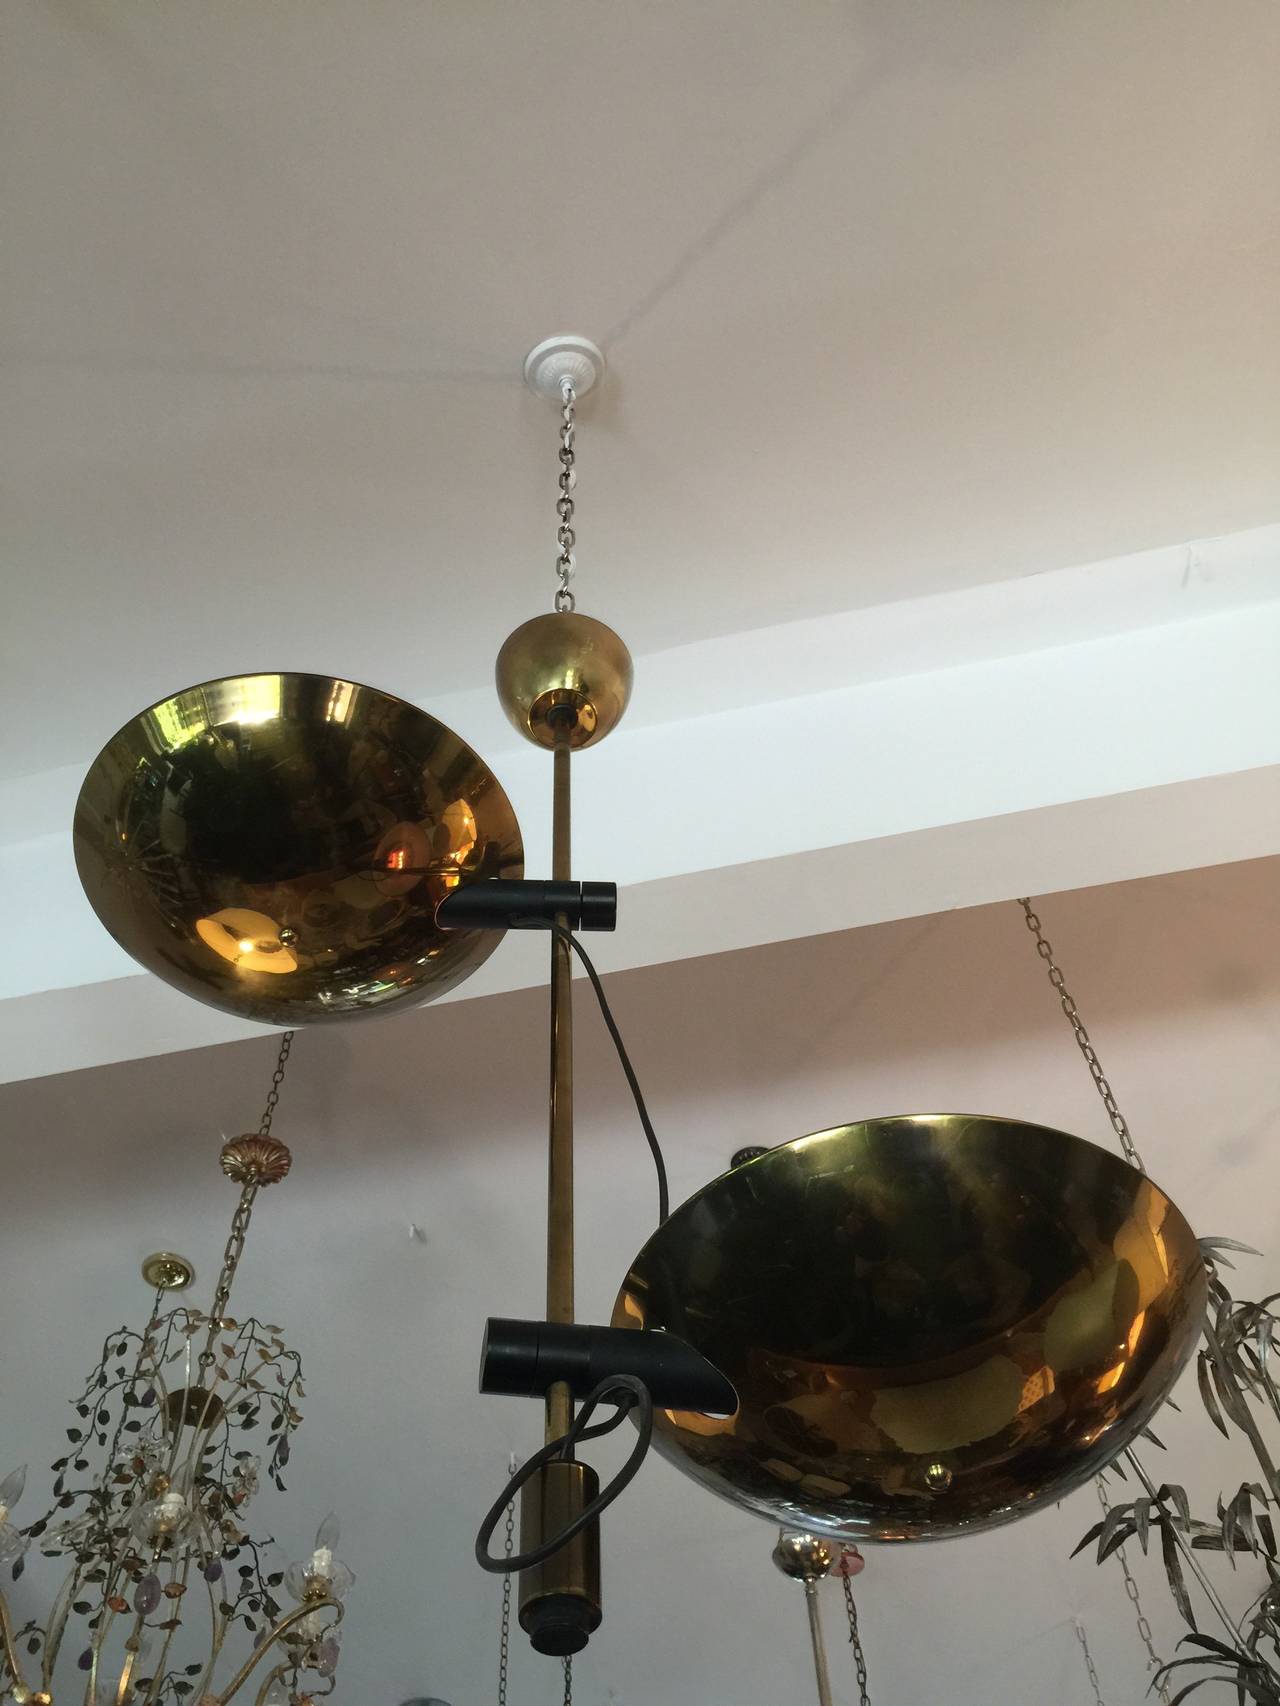 Rarely available Italian double bowl brass uplight fixure. The bowl fixtures can be adjusted vertically and horizontally. Each bowl is uplit with holds a 250W halogen bulb. Original canopy.  Dimensions listed below are approximate - exact dimensions